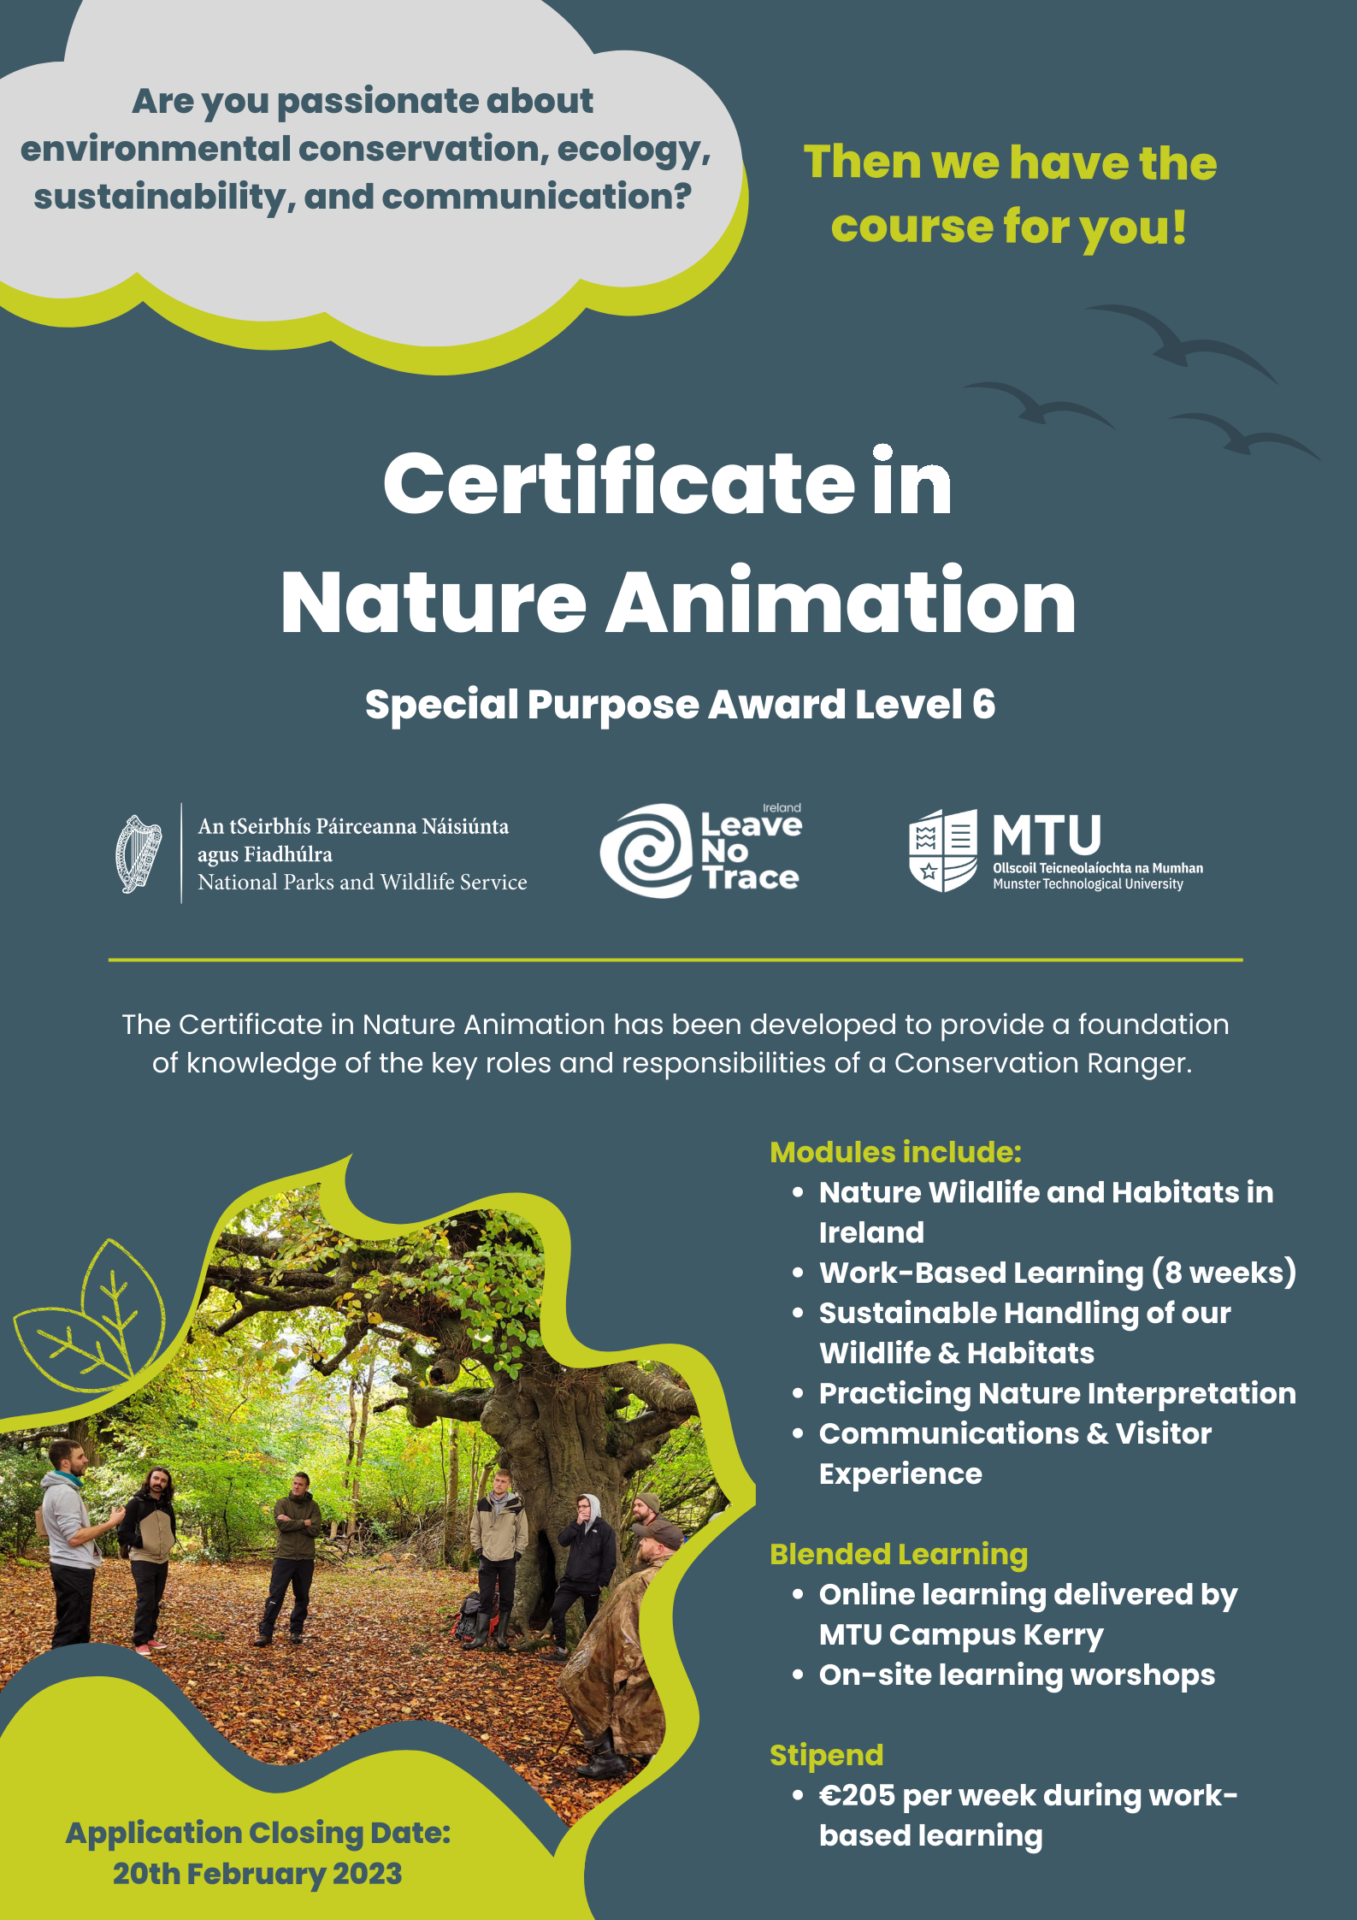 The Certificate in Nature Animation - Leave No Trace Ireland